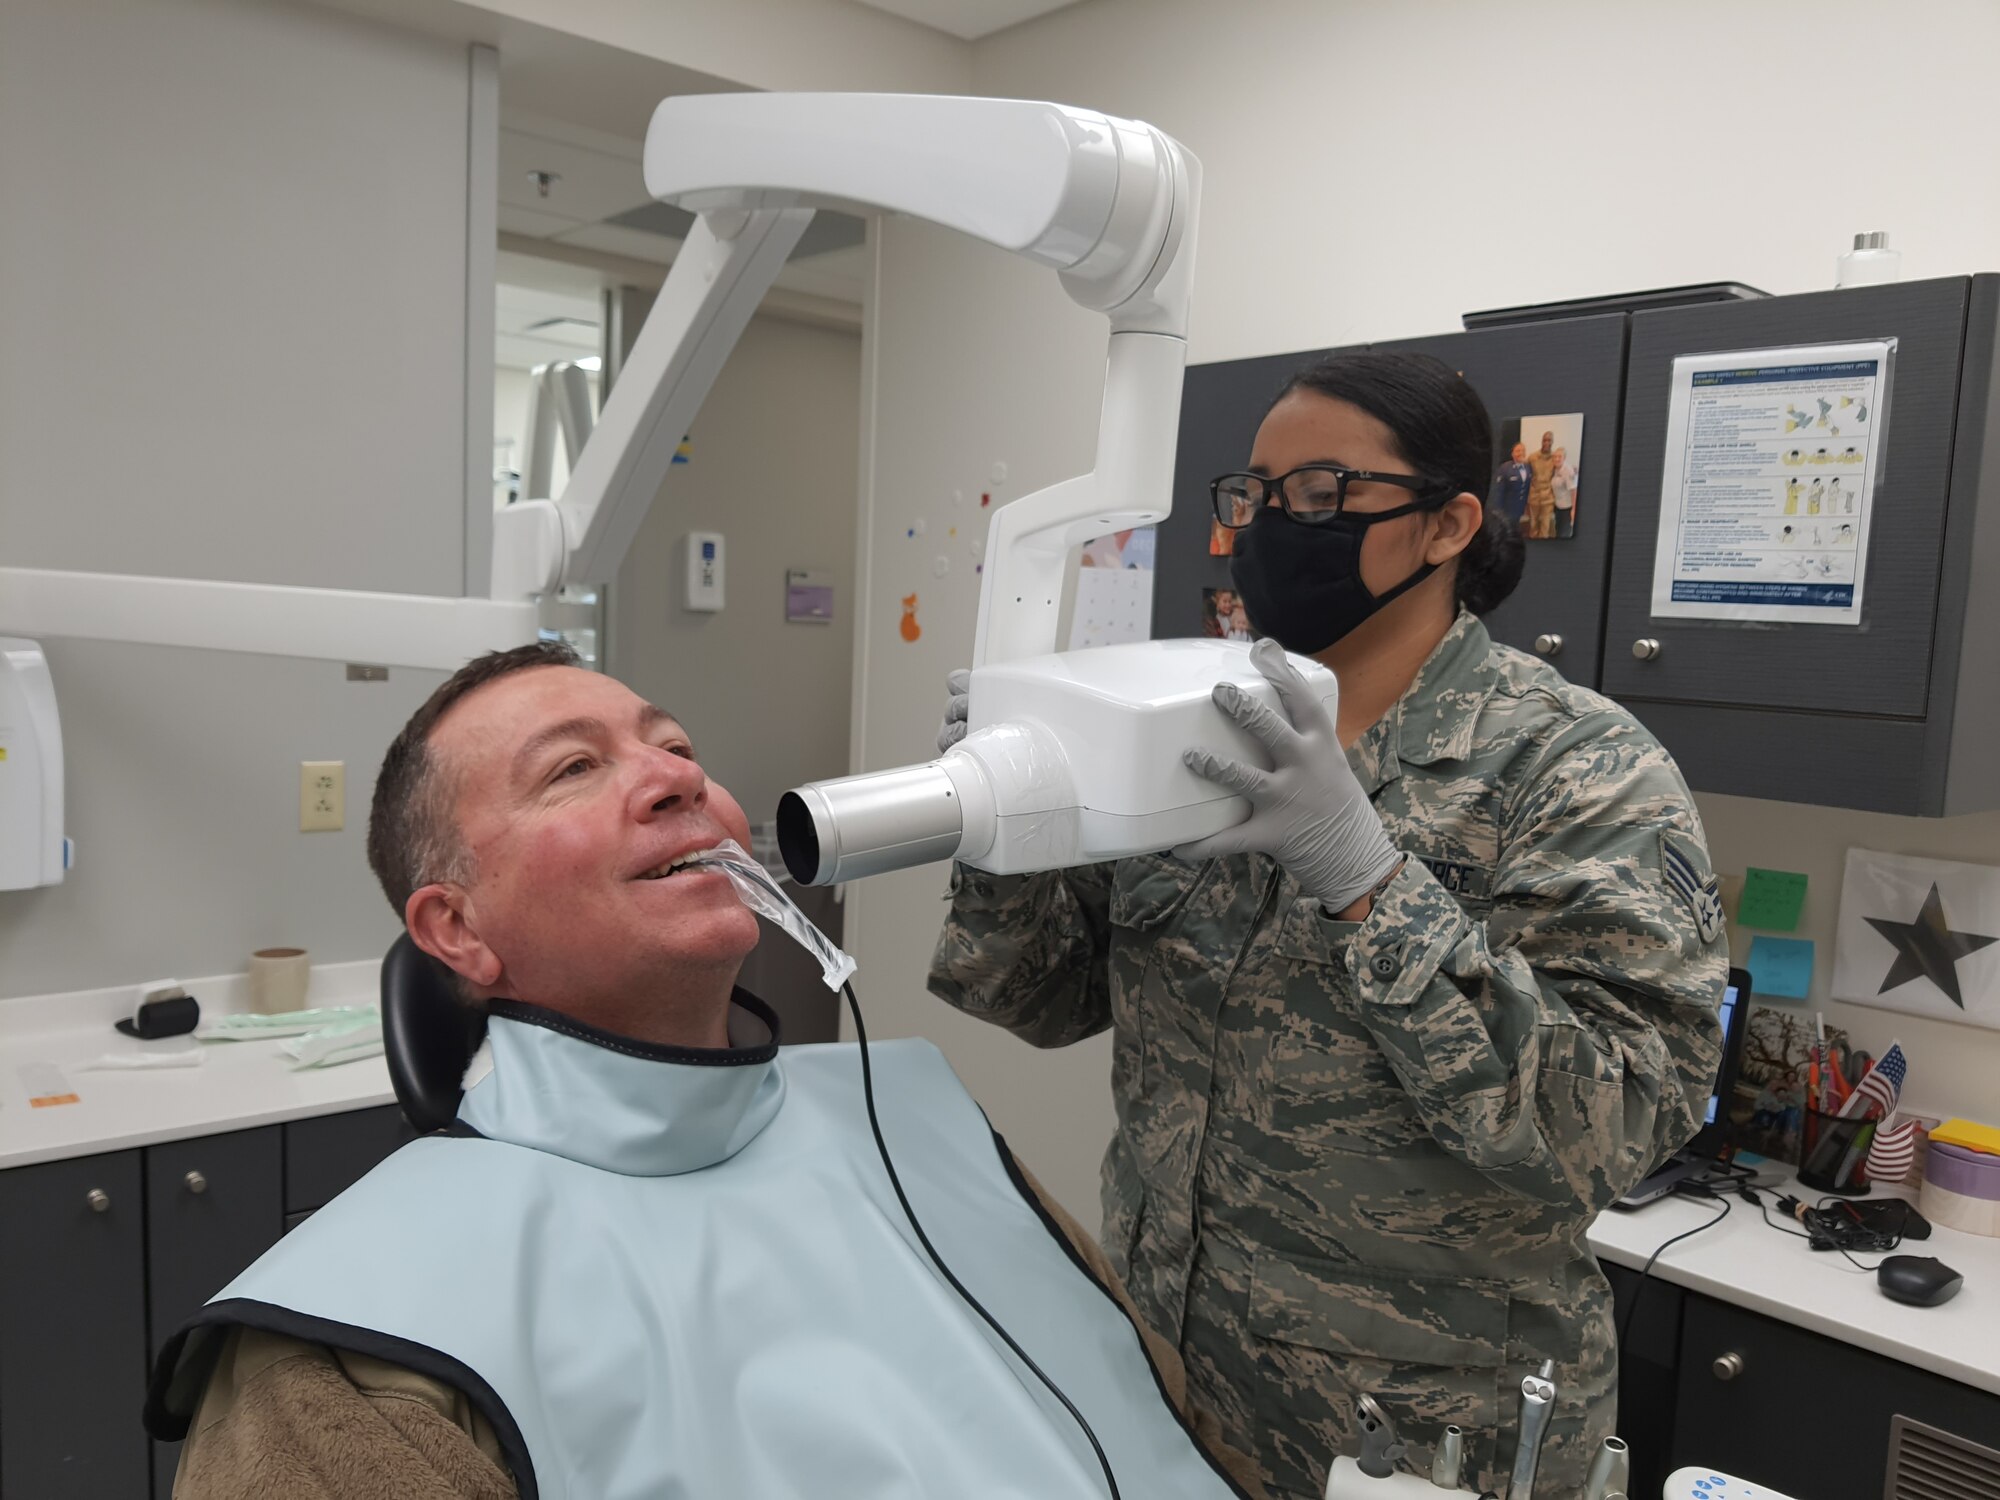 Tech. Sgt. Travis Walters, 403rd Aircraft Maintenance Squadron electro environmental specialist, has dental x-rays taken by Senior Airman Ariana Ambrocio, 403rd Aeromedical Staging Squadron dental assistant technician, Feb. 6, 2021. The 403rd ASTS is responsible for ensuring that the Reserve Citizen Airmen of the 403rd Wing are current or 'green' on their Individual Medical Readiness status; which includes providing immunizations, optometry services, dental x-rays and exams, lab draws, audiograms, and physicals. (U.S. Air Force photo by Master Sgt. Jessica Kendziorek/ photo permission granted by Tech. Sgt. Travis Walters)